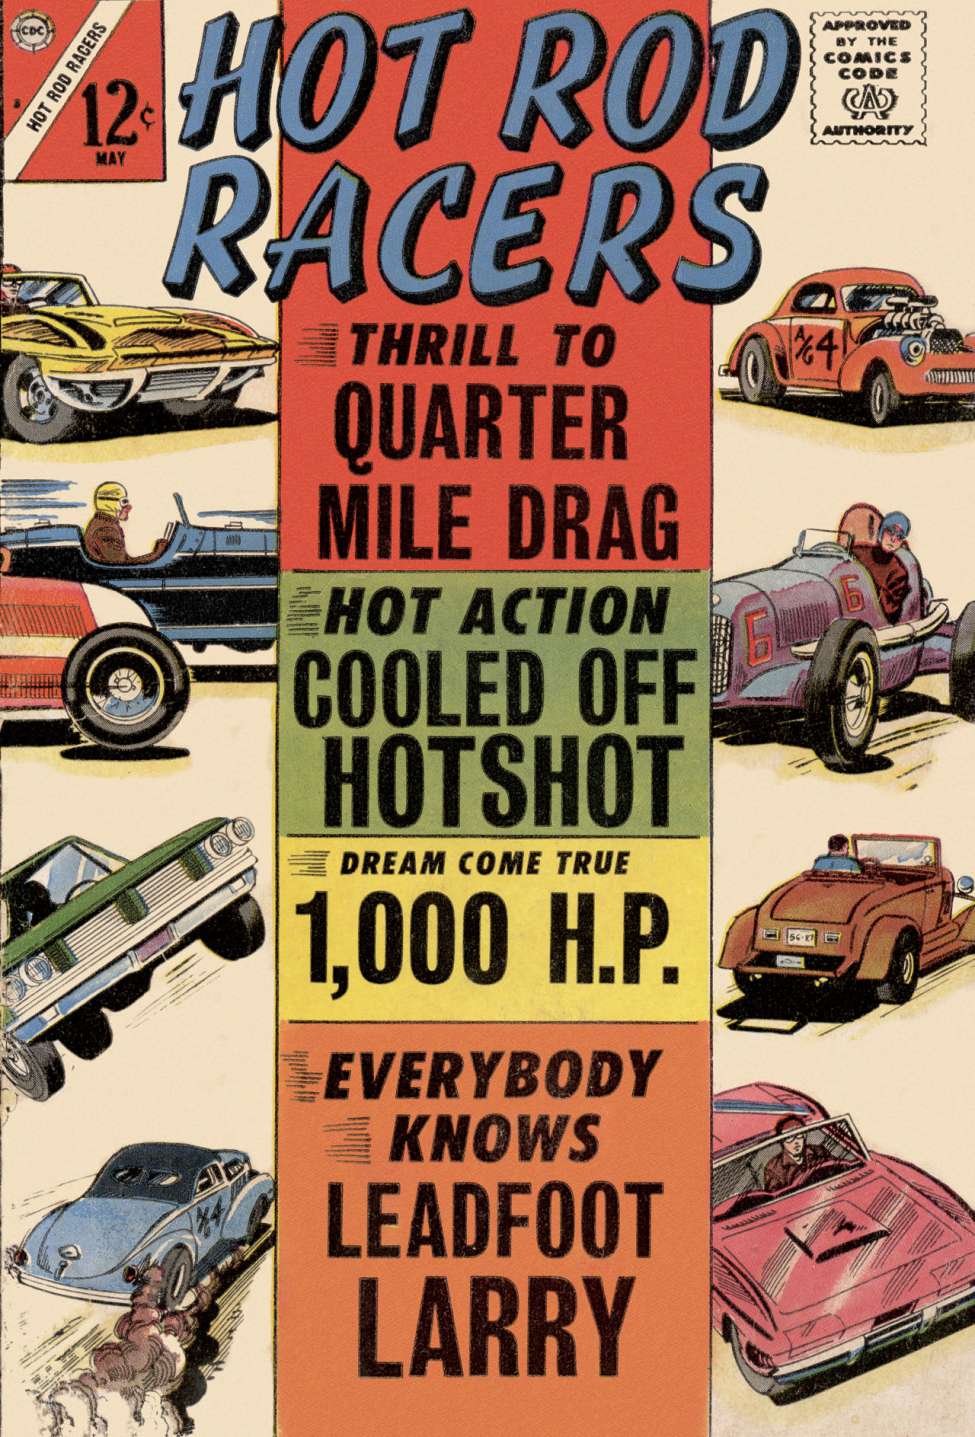 Book Cover For Hot Rod Racers 8